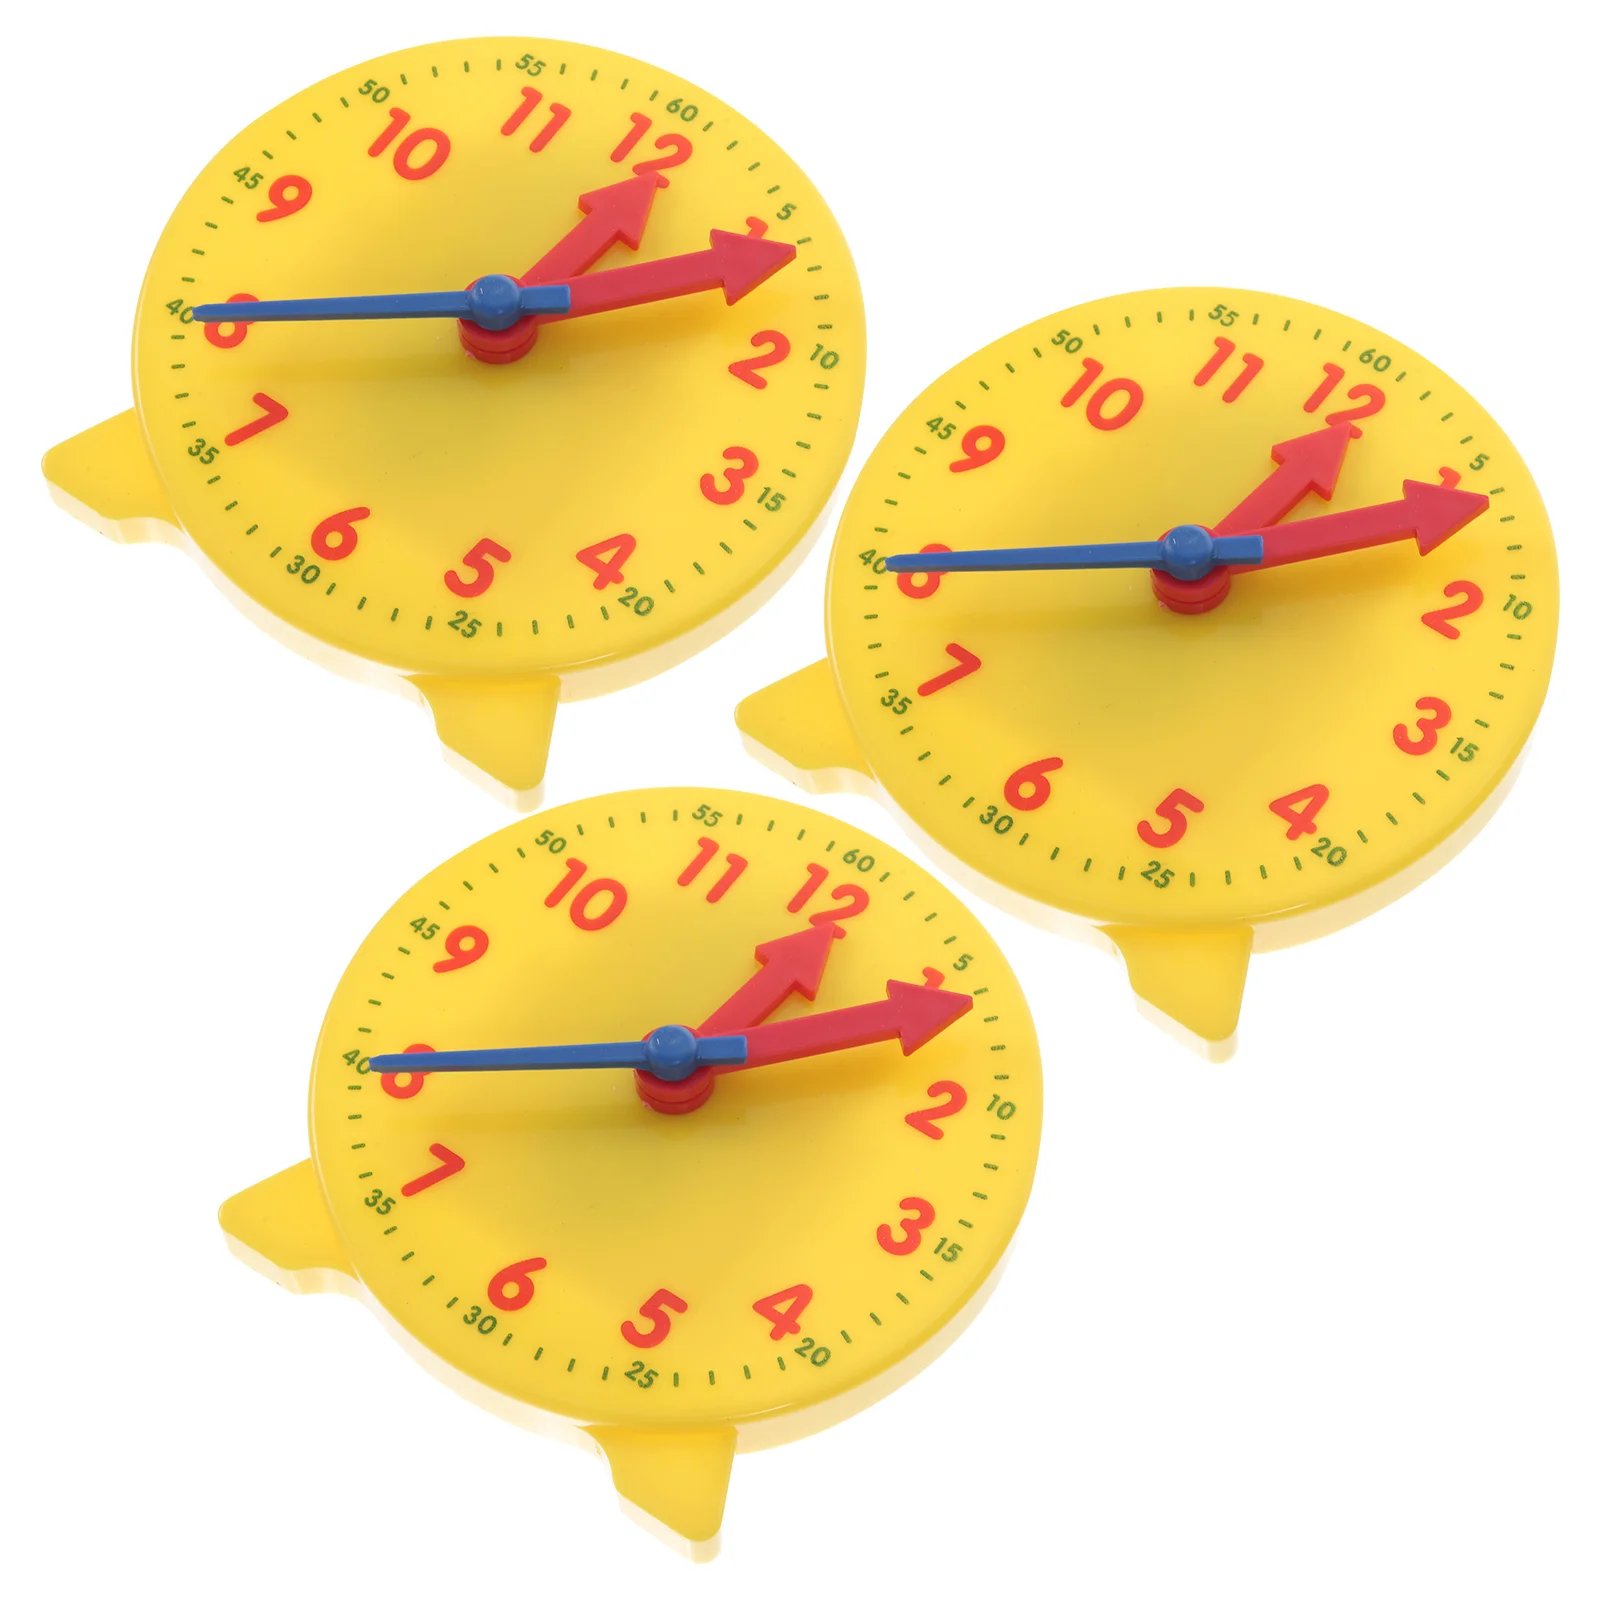 

3 Pcs Clock Model Teaching Aids Perception Time Tool Display Toys Models Childrens Plastic Learn Read Kids Learning